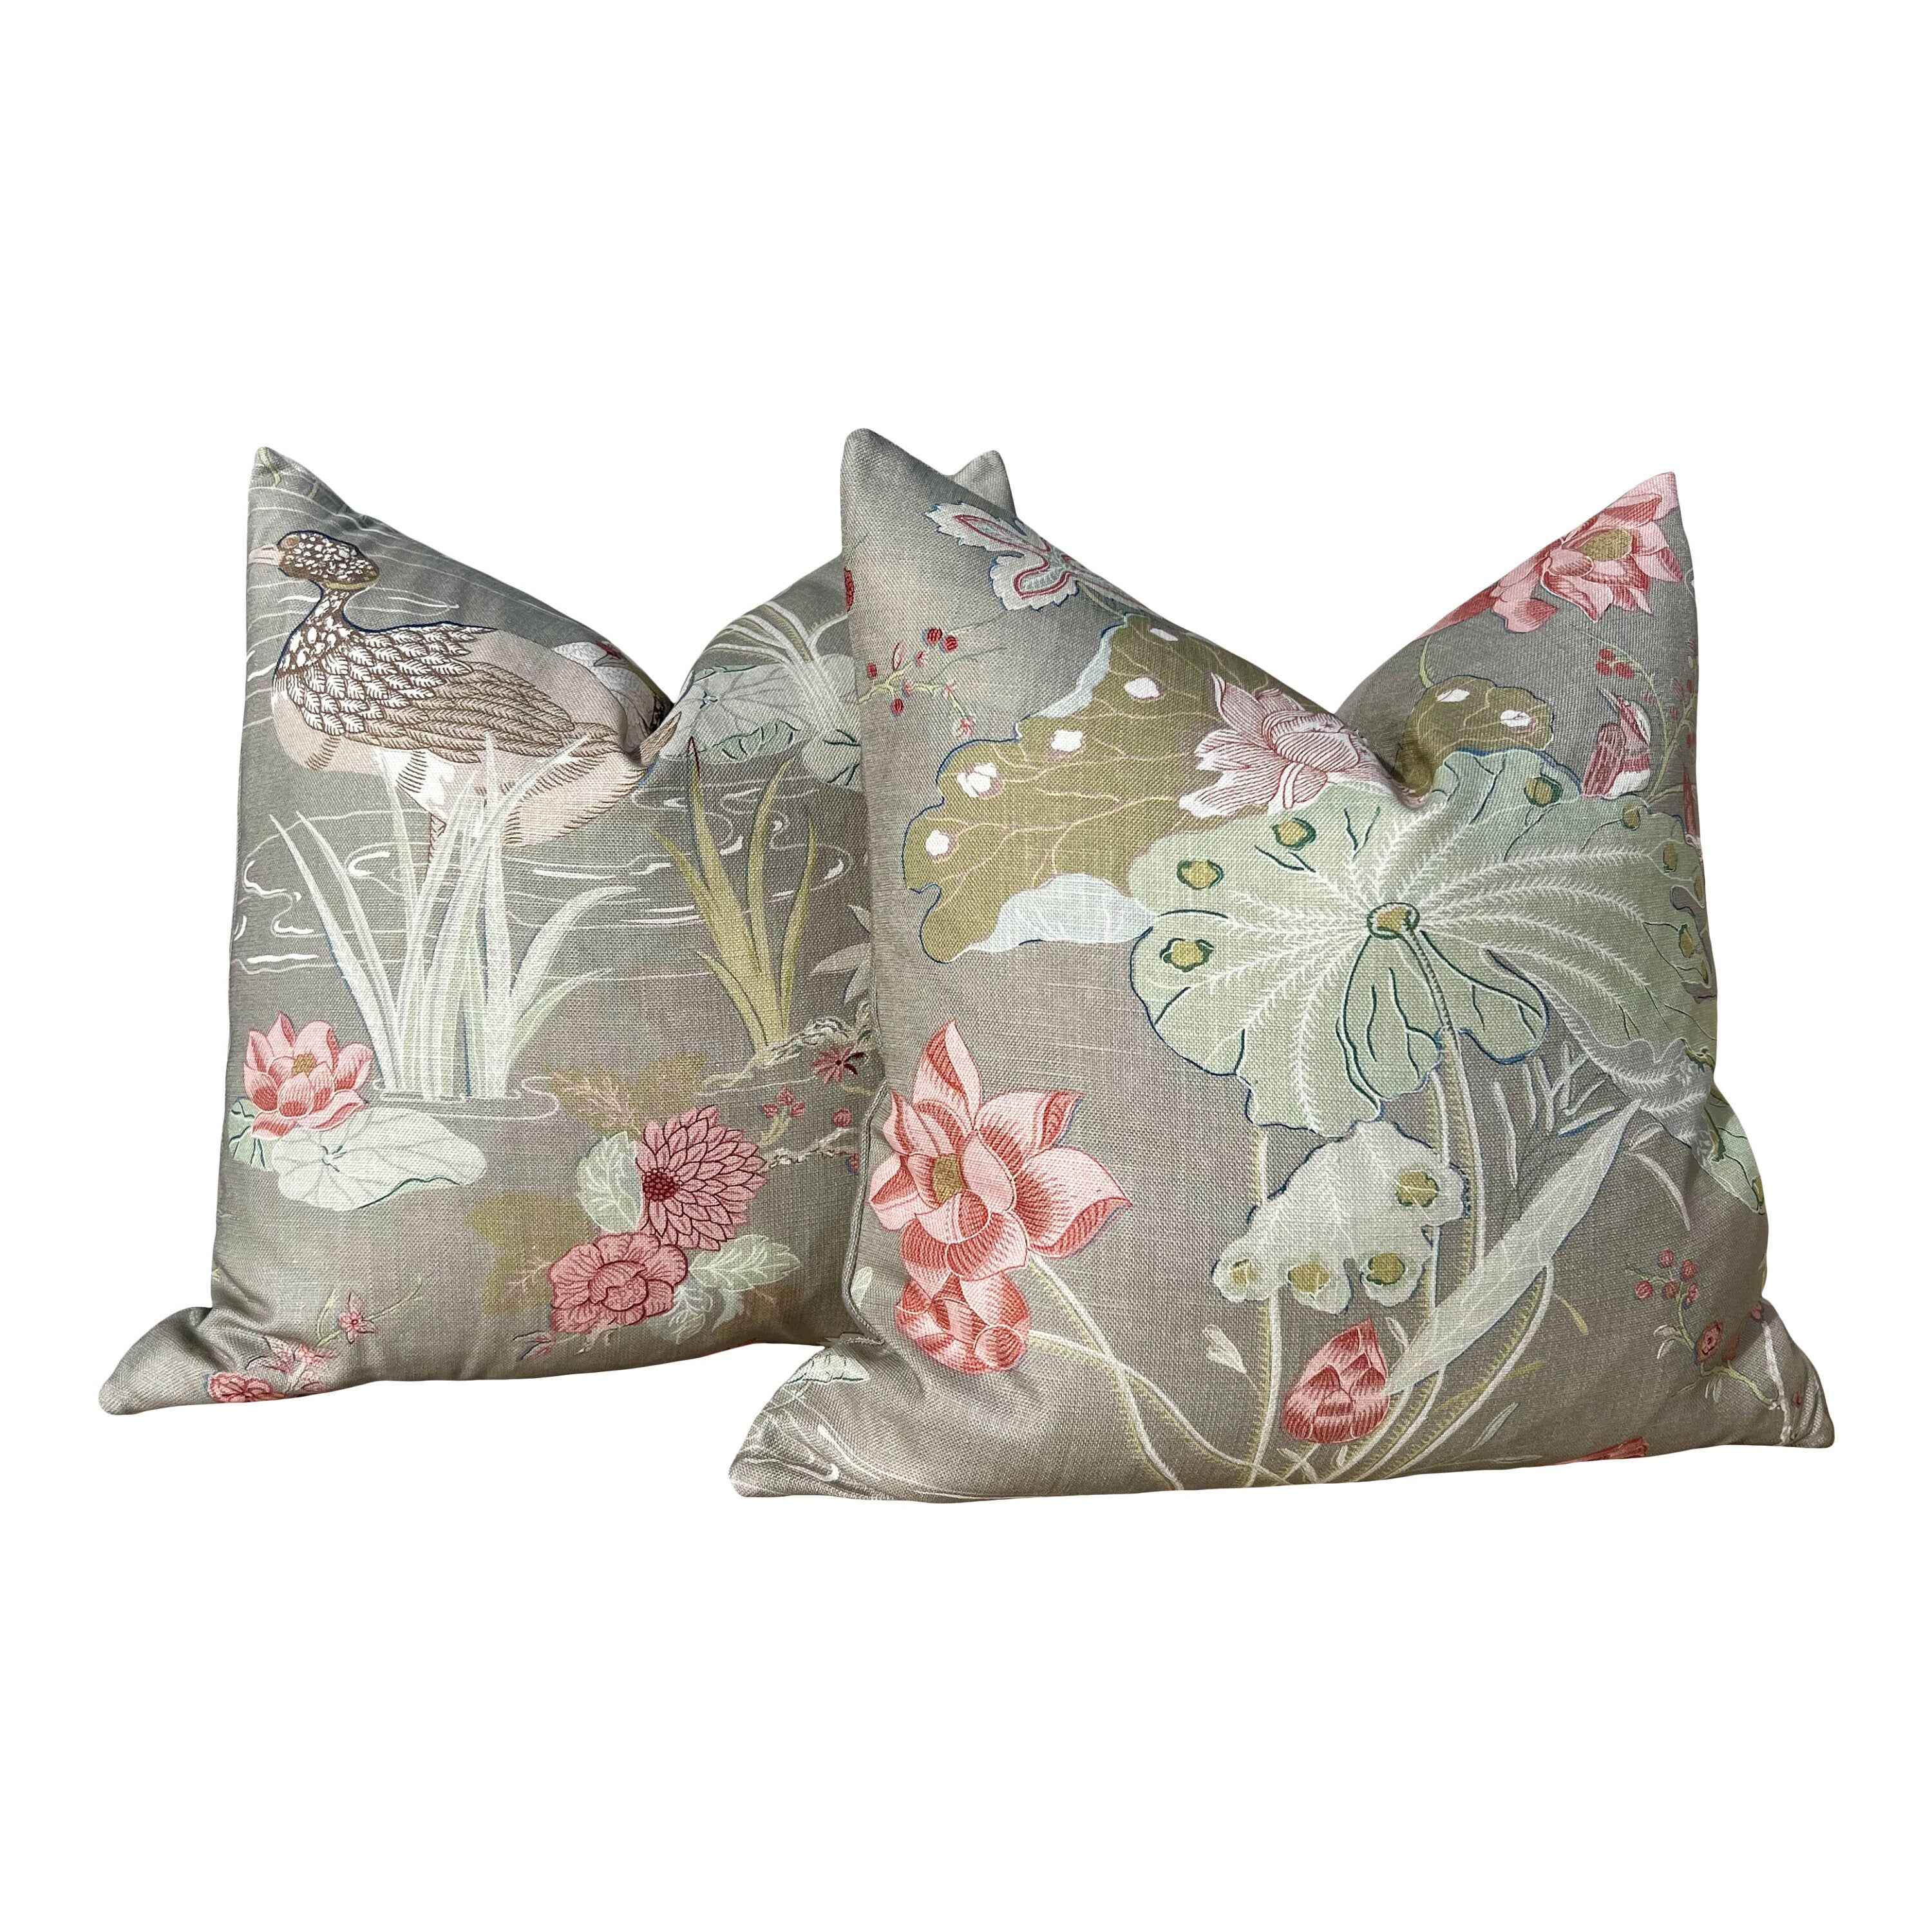 Lee Jofa Luzon Pillow in Fawn. Linen Taupe Pillows Designer Exotic Floral Pillows Luxury Botanical Pillow High End Aqua Green Coral Cushion